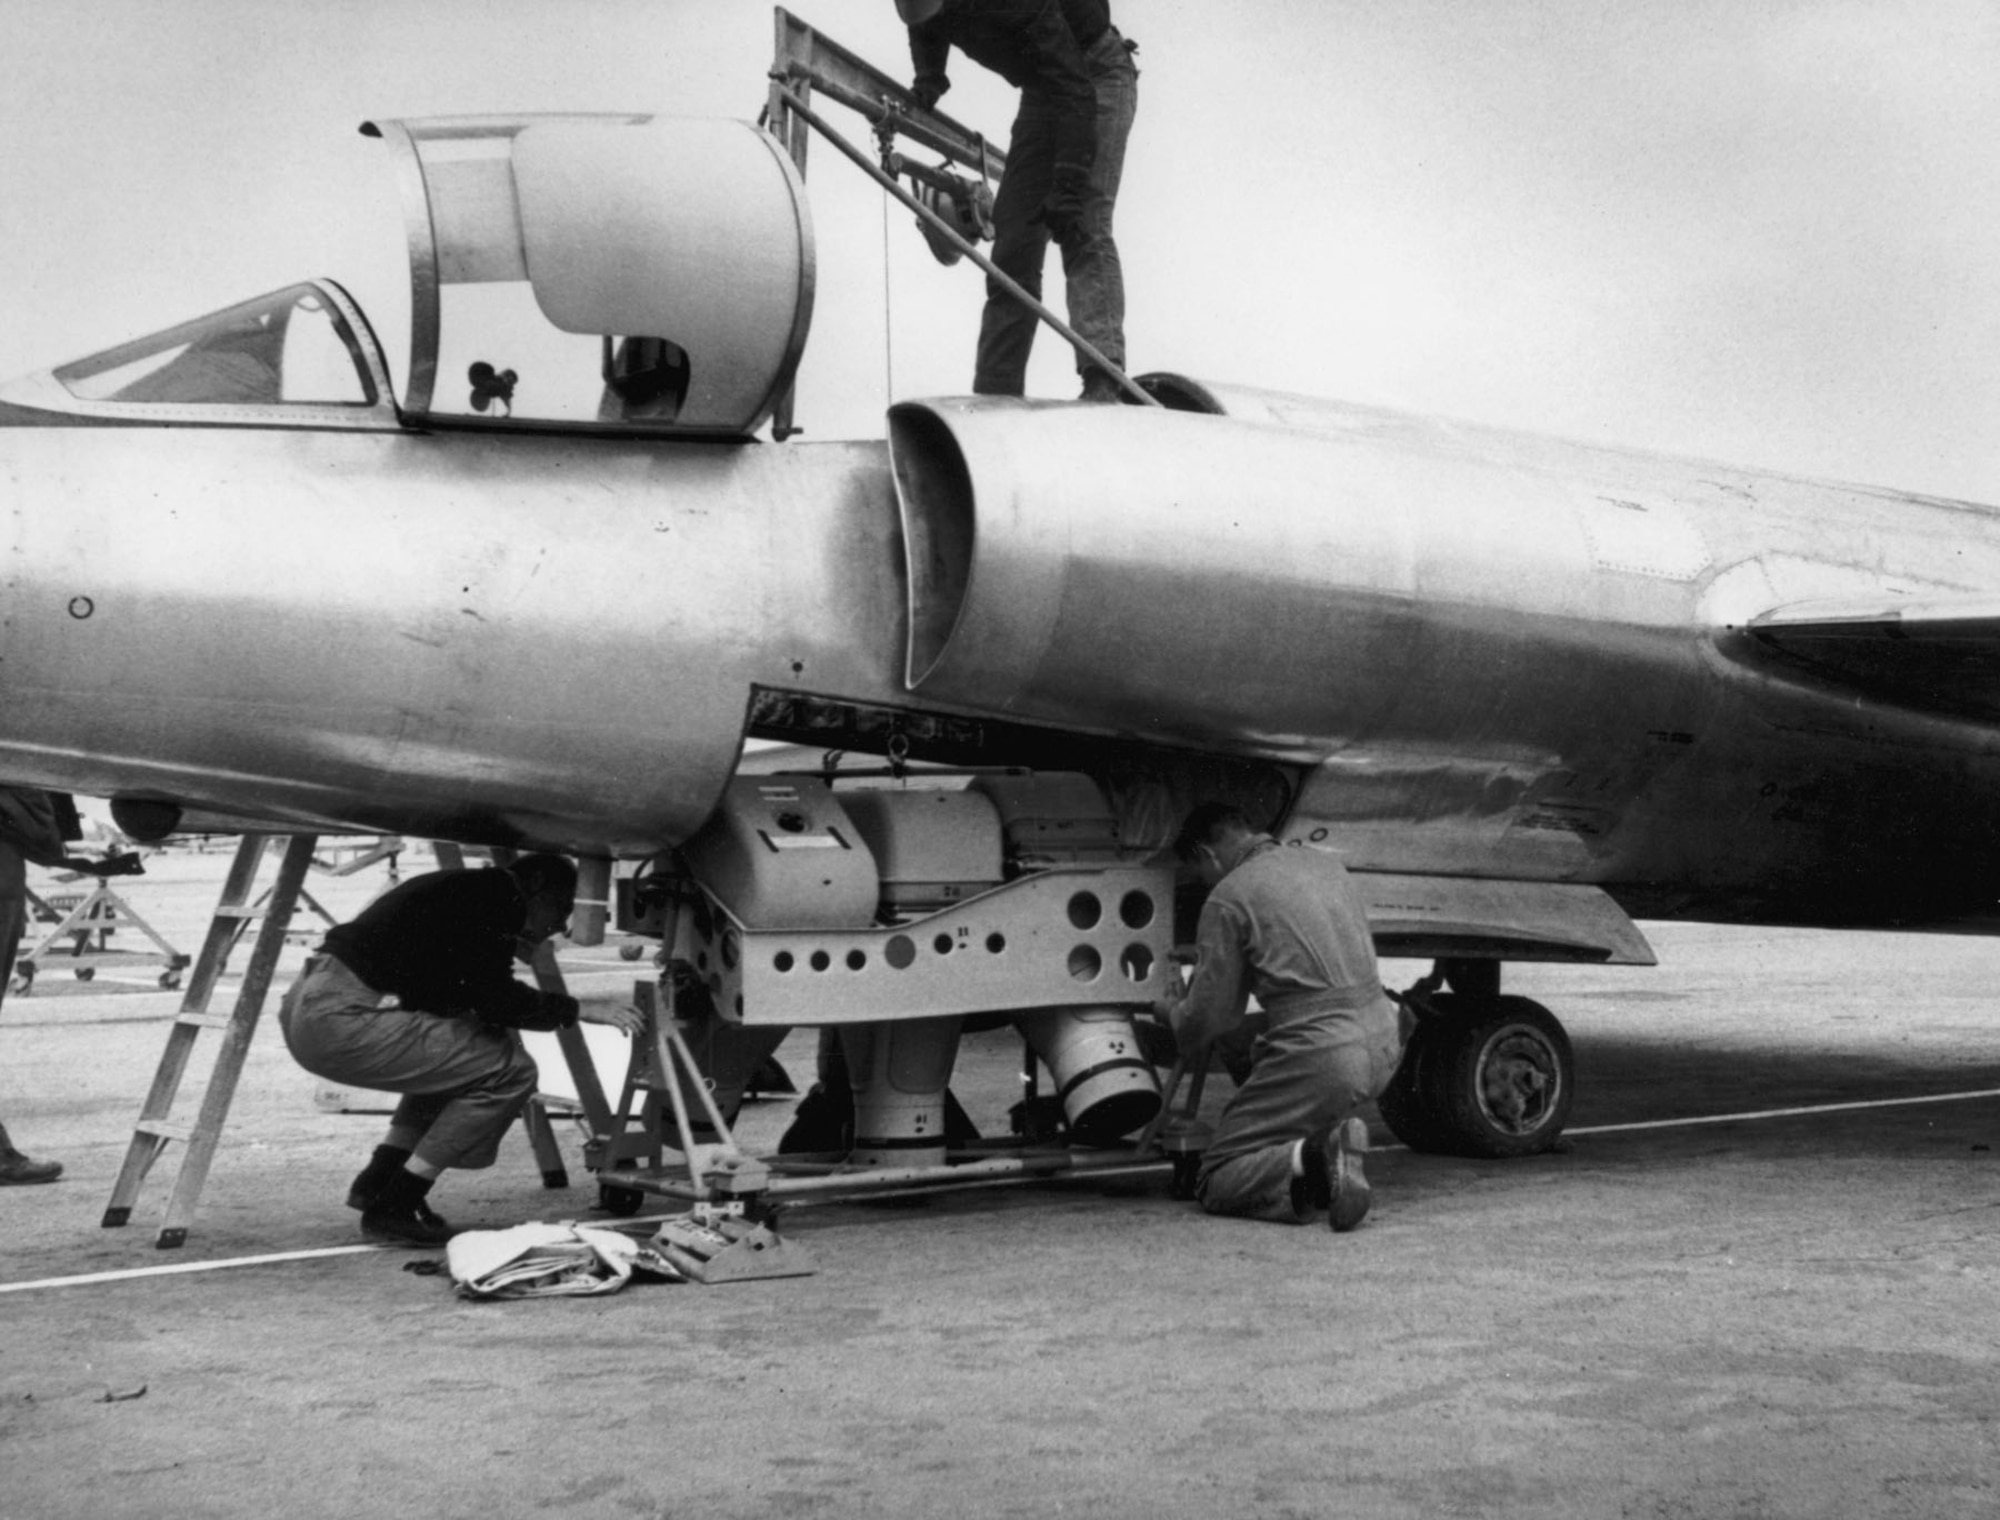 Technicians load a type A-2 camera set into a U-2’s equipment bay or “Q-bay.” This camera configuration was used on the first U-2 Soviet overflight on July 4, 1956. (U.S. Air Force photo)